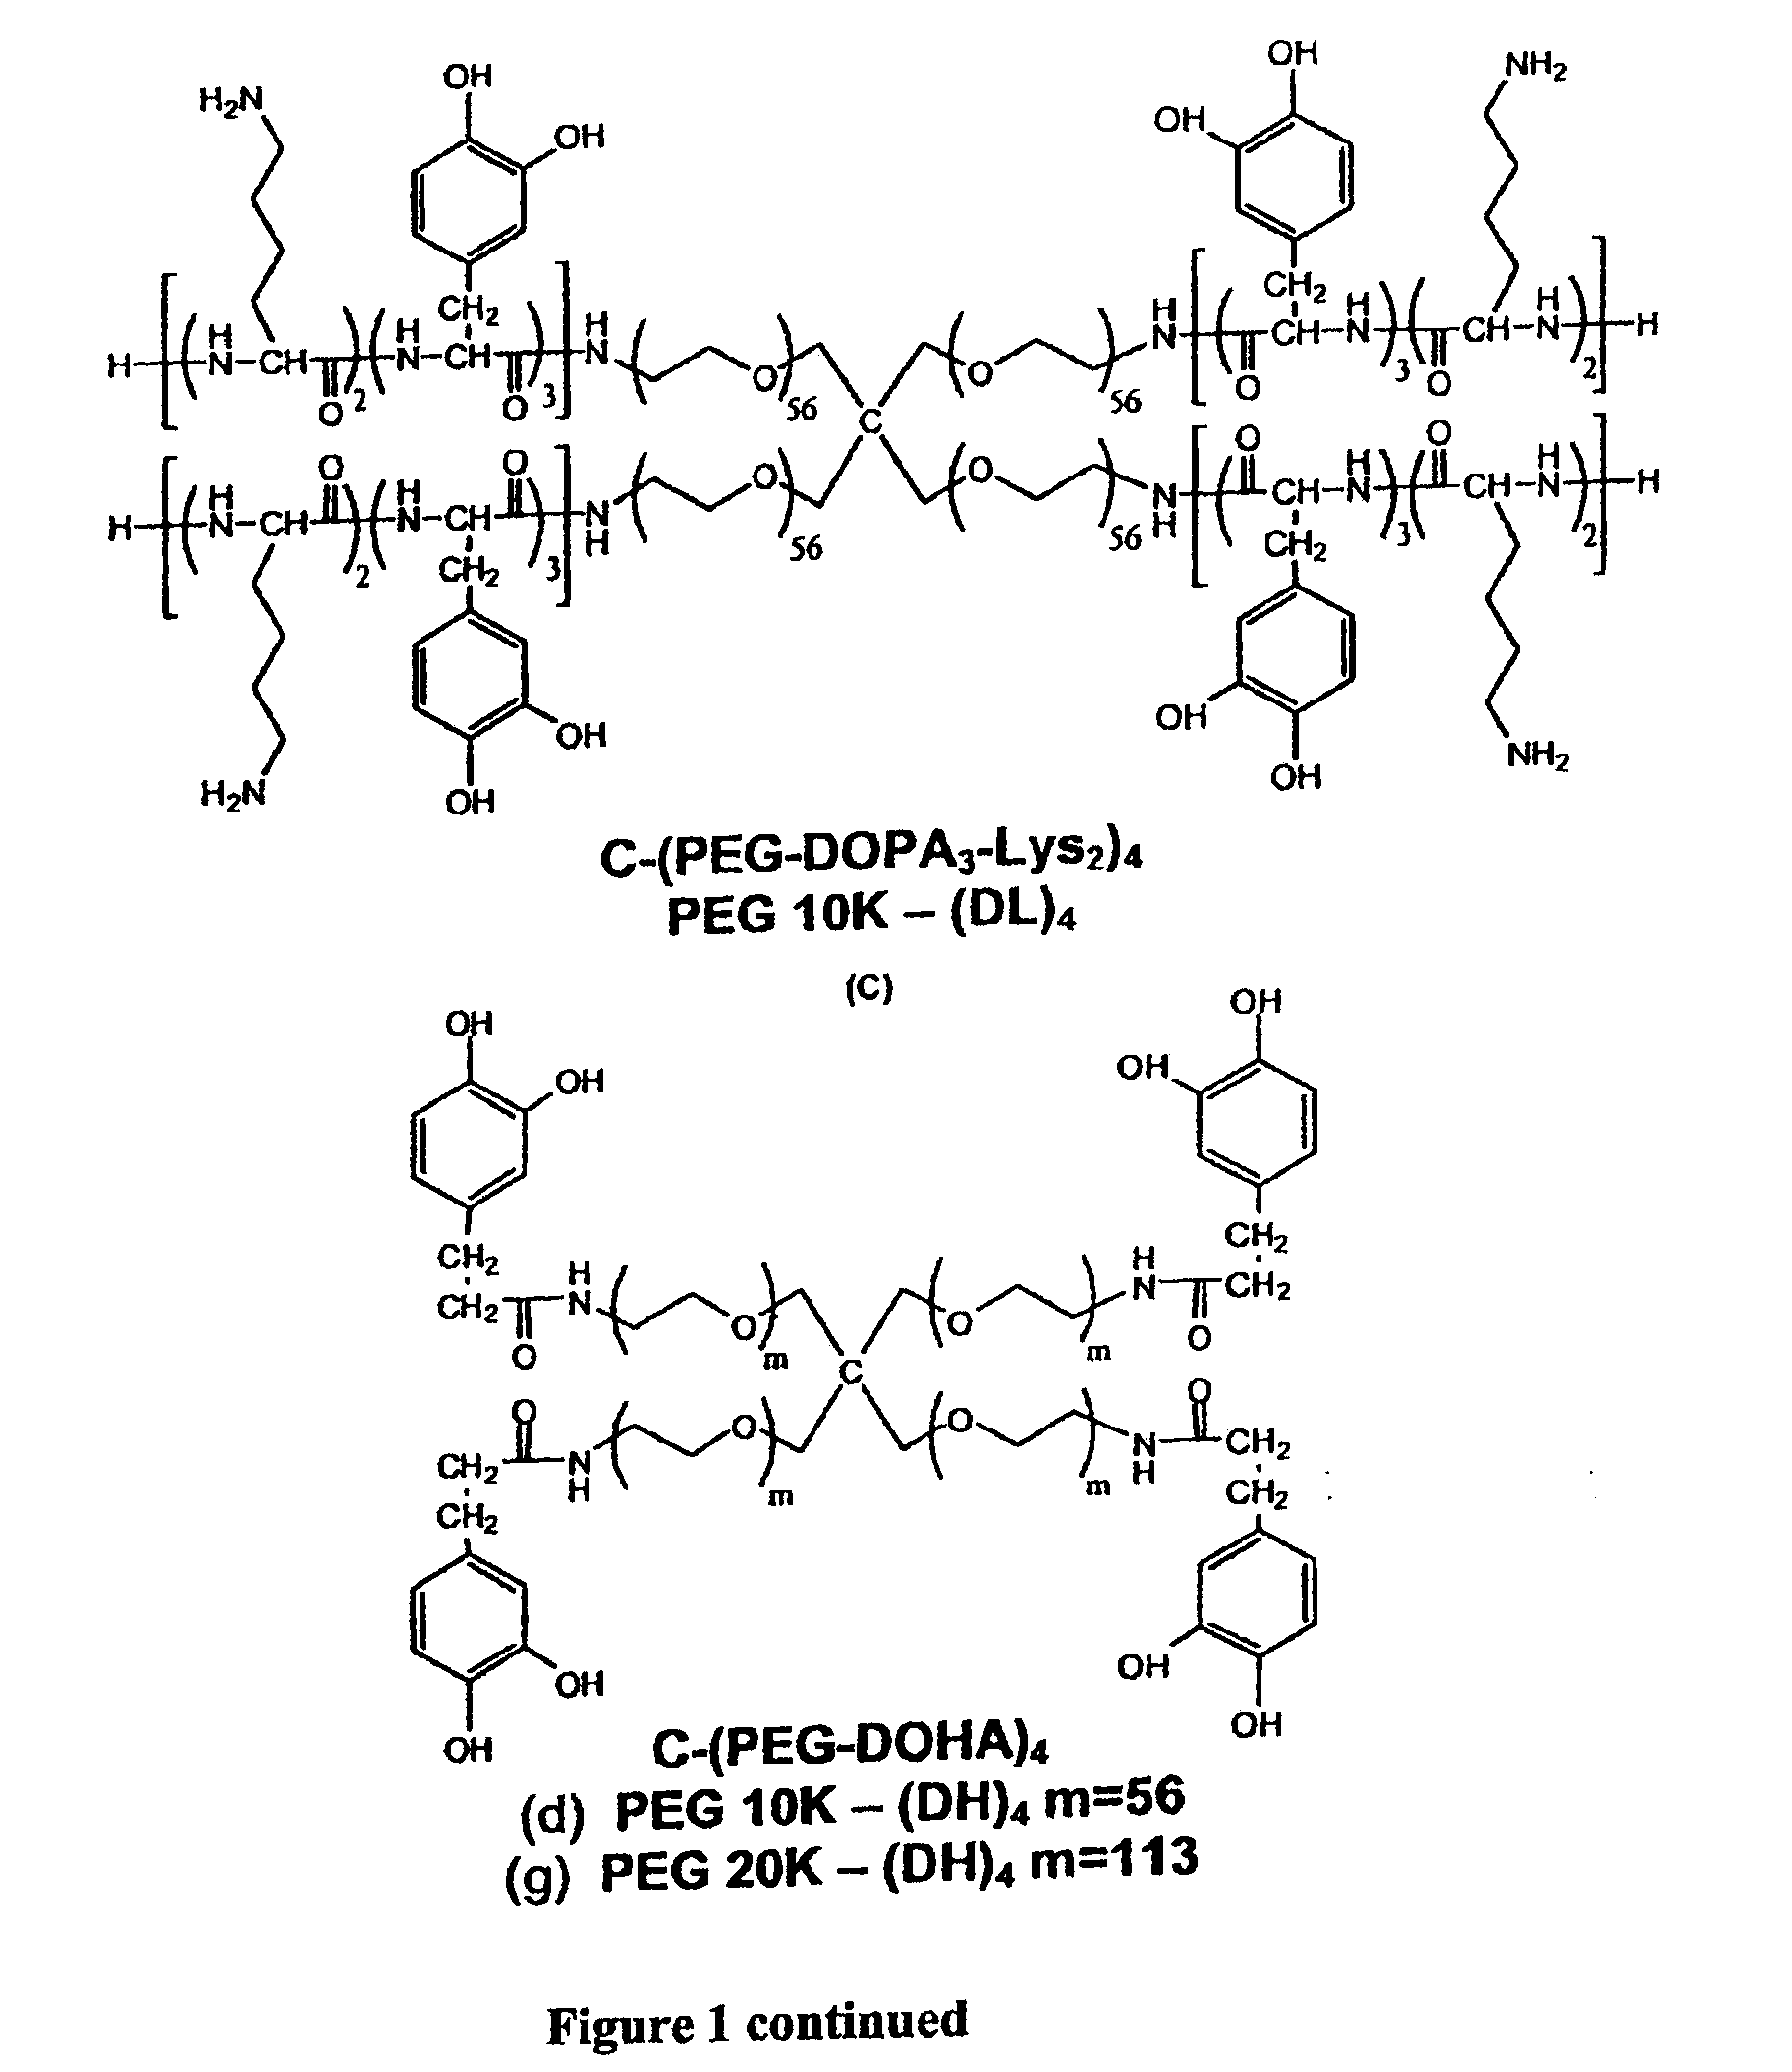 Dopa-functionalized, branched, poly(aklylene oxide) adhesives